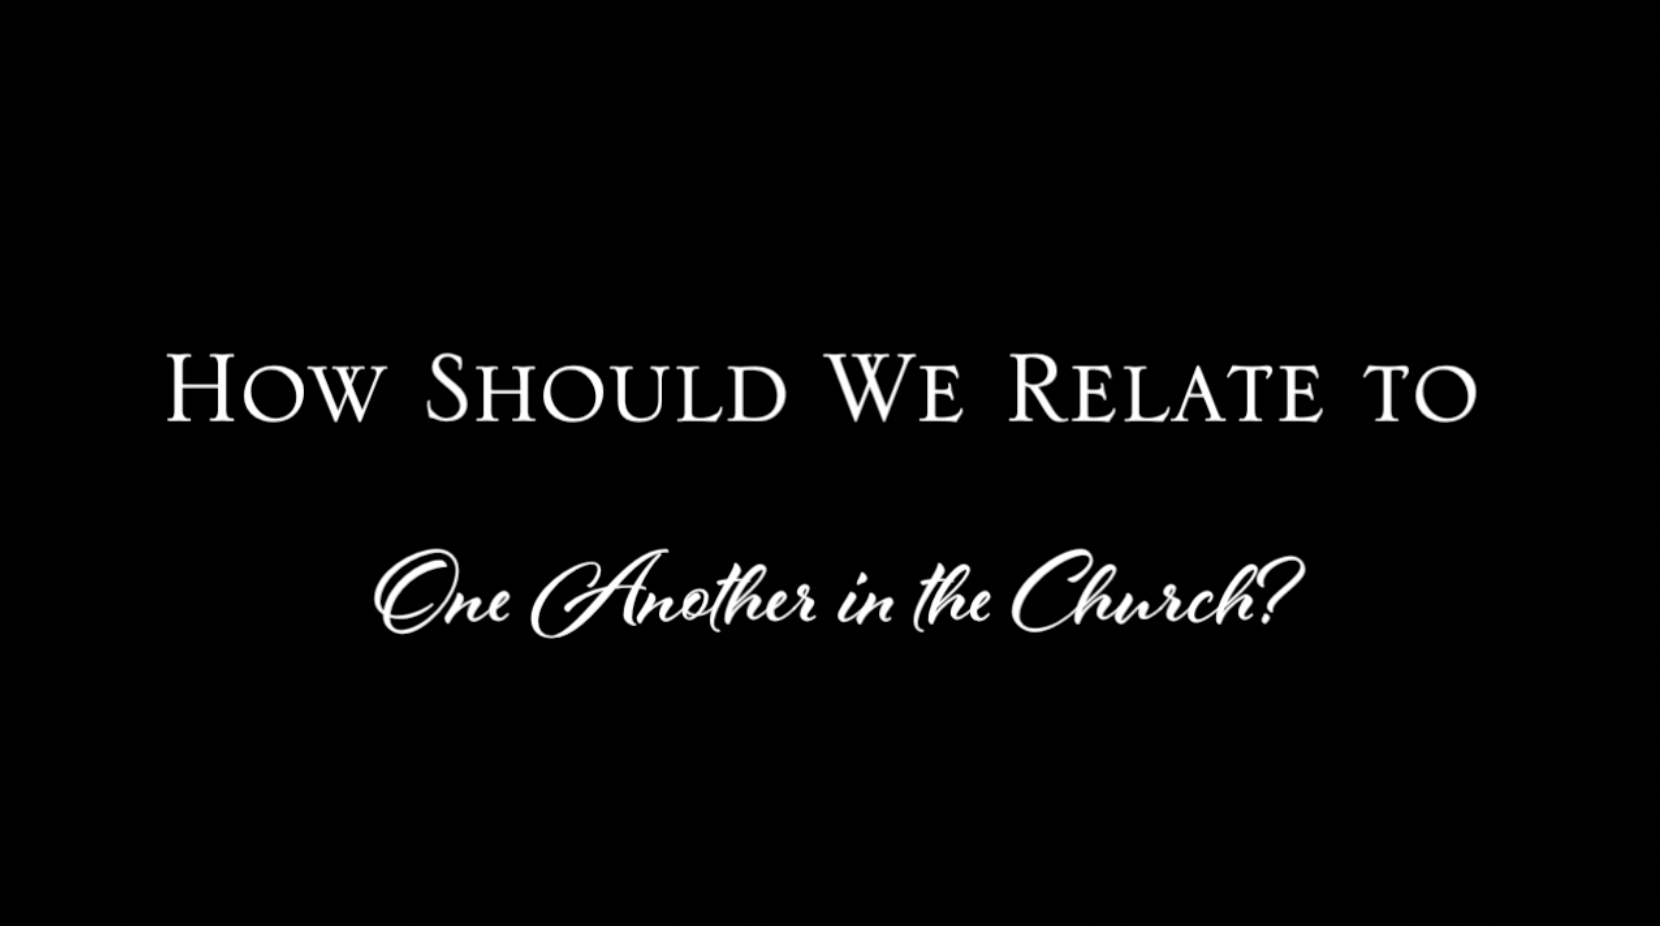 How Should We Relate to One Another in the Church?